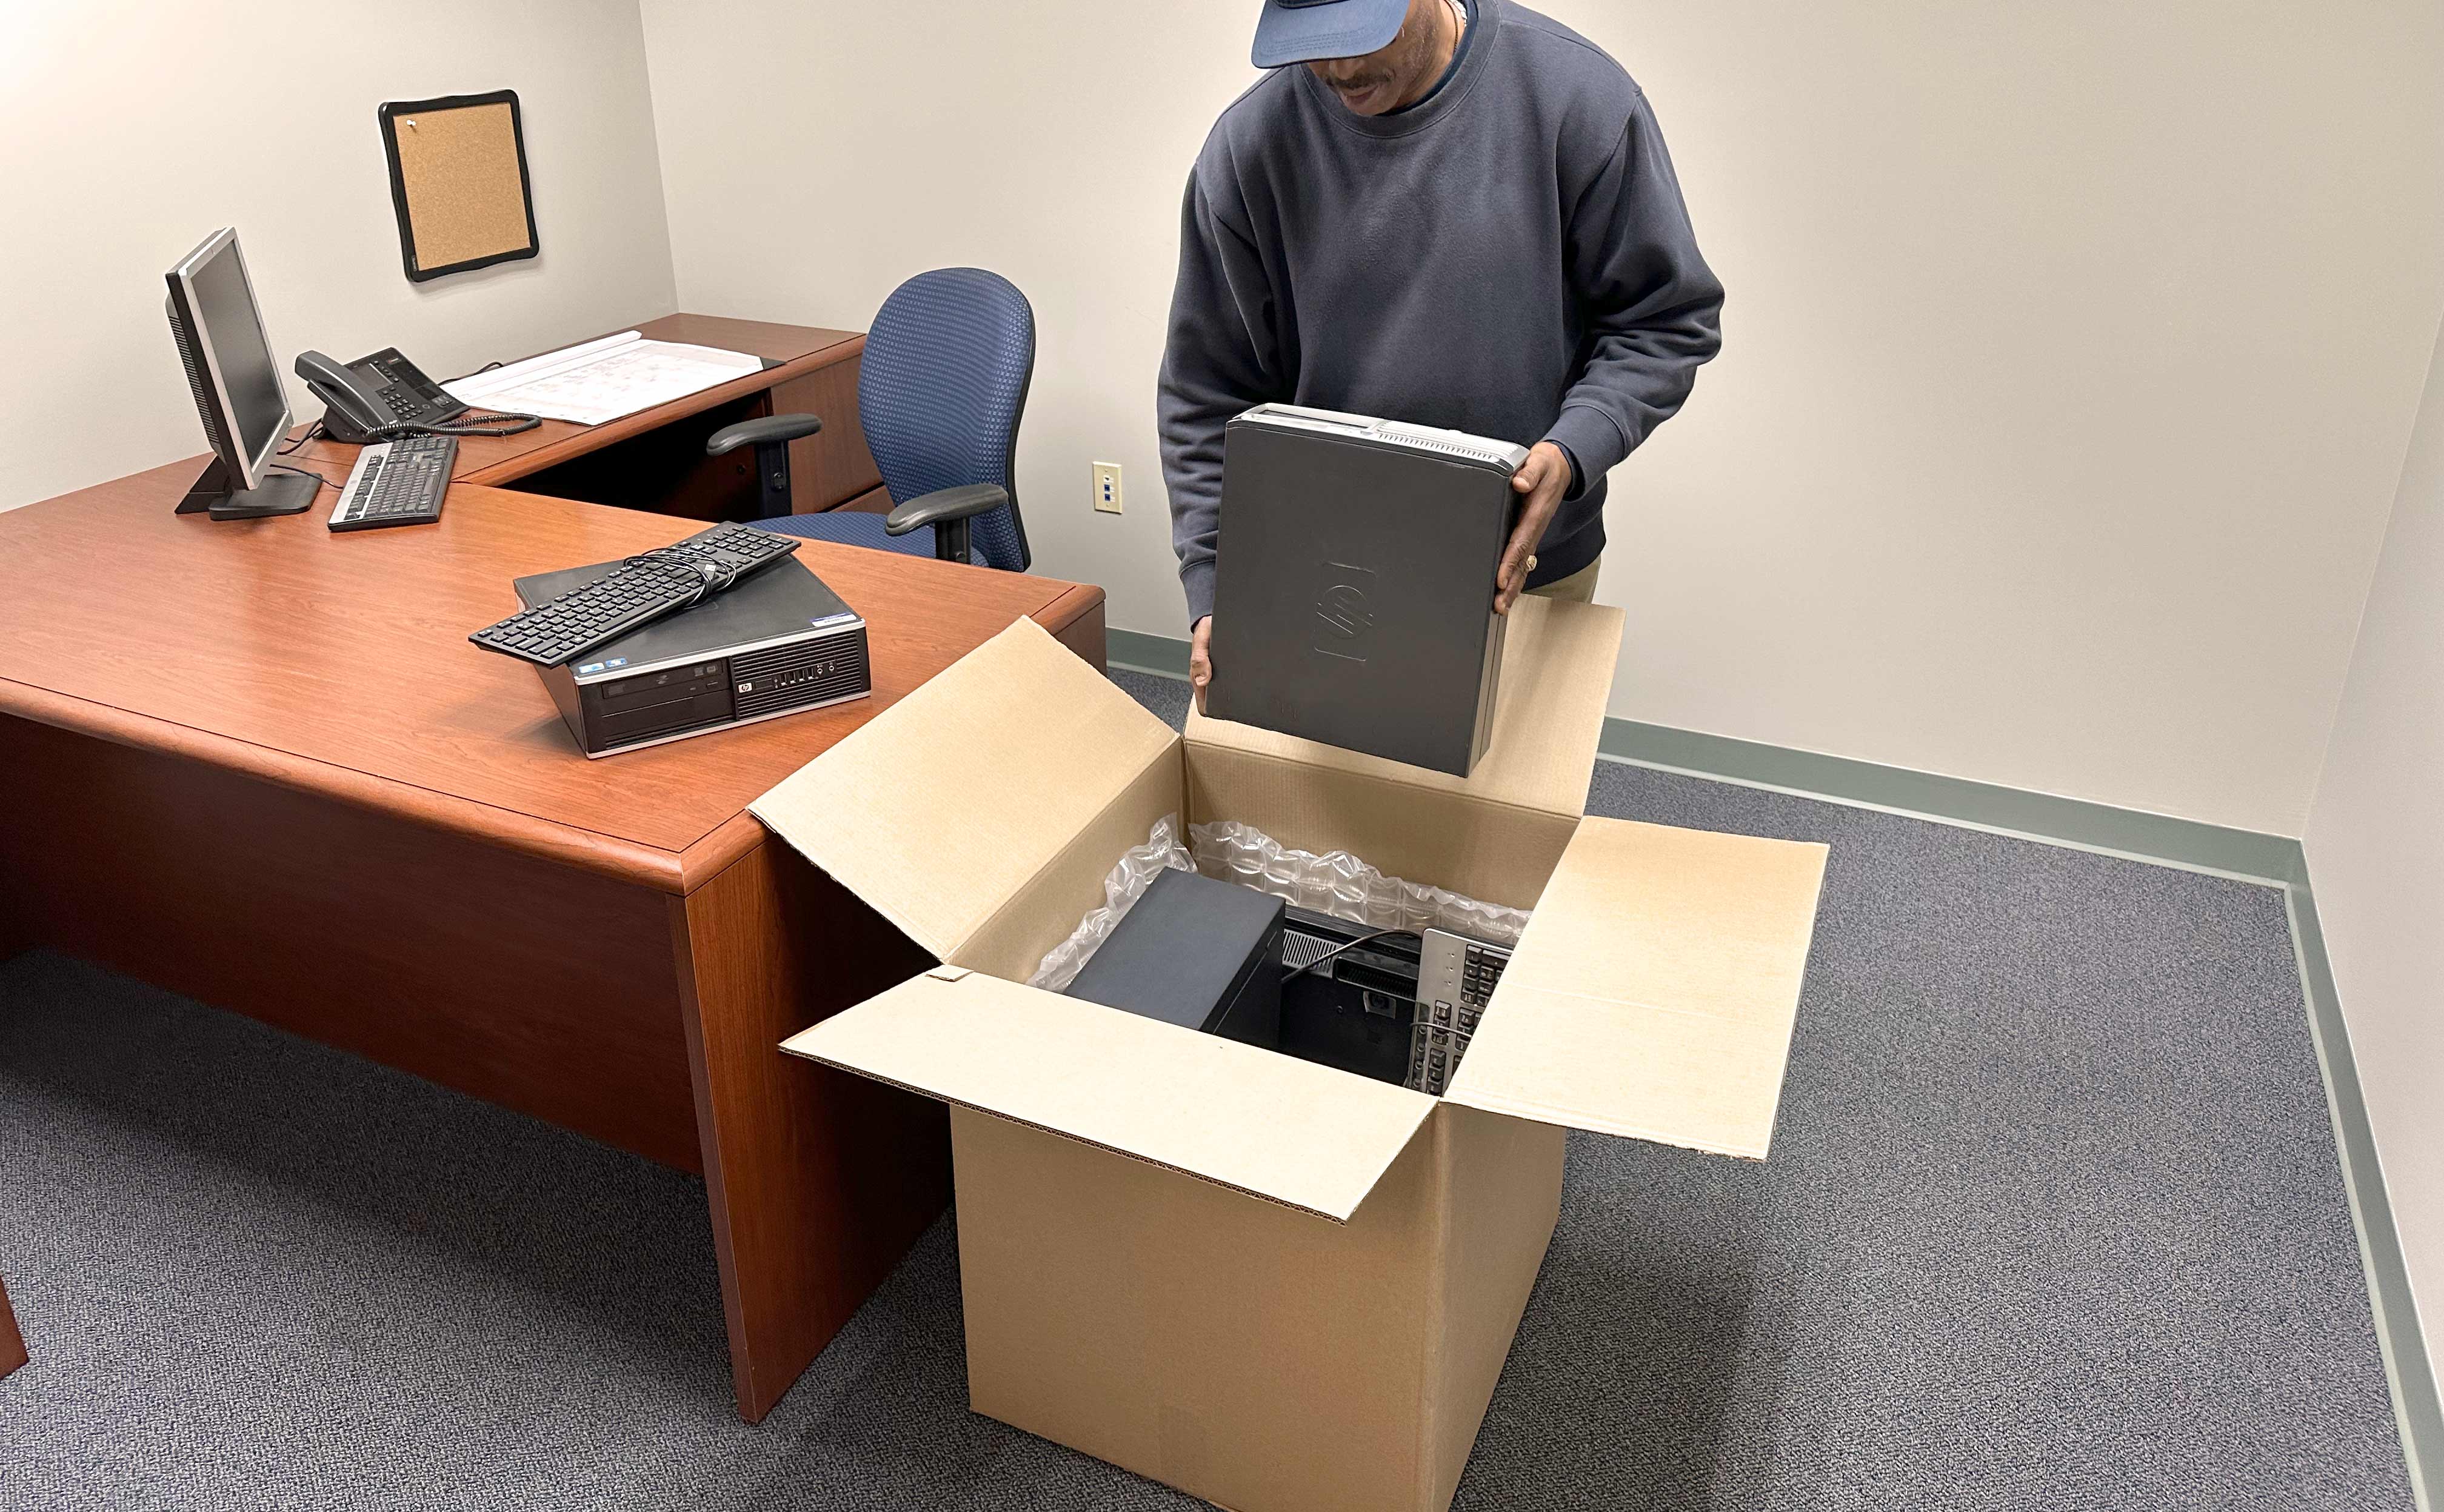 70 pound electronics recycle box on office room floor - man placing computer in box amongst a variety of office electronics